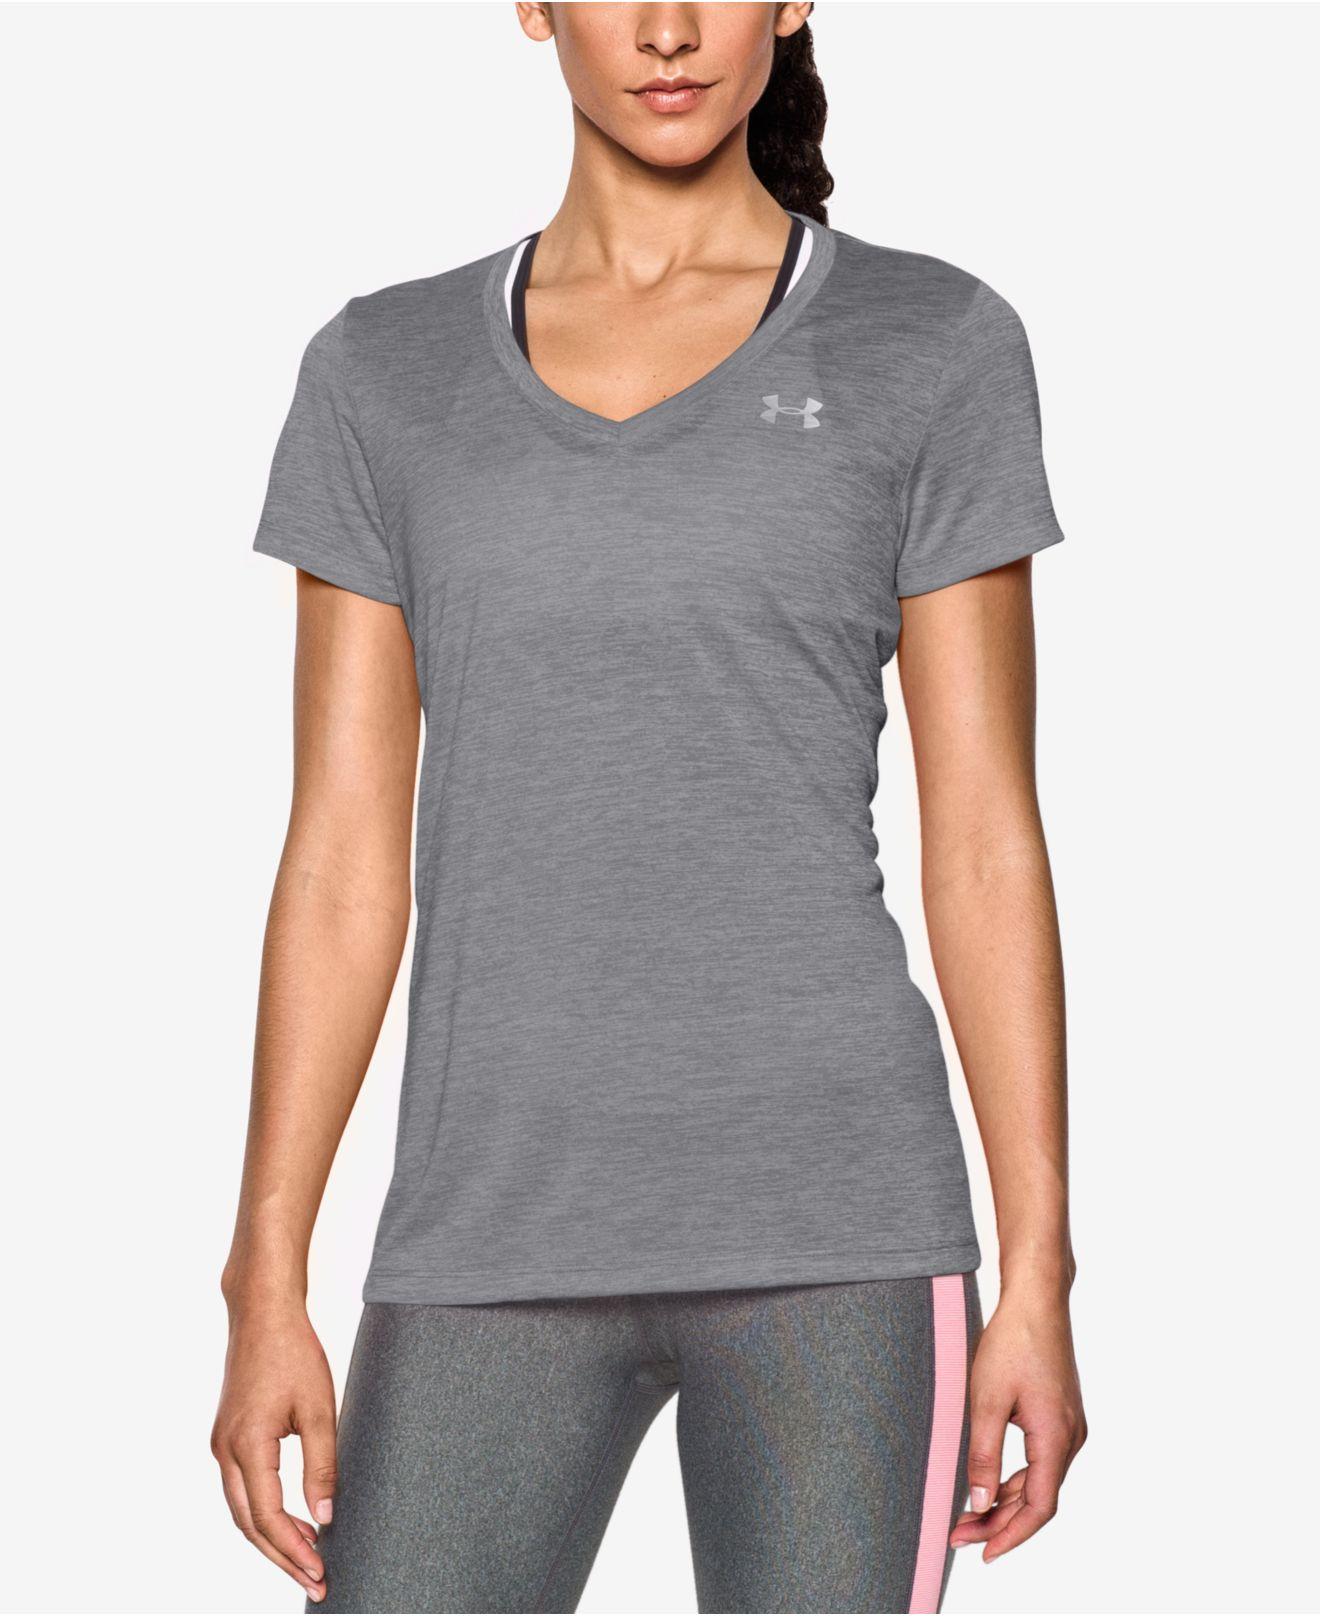 Under Armour Under Amour Ua Tech Twist V-neck Tee in Blue - Save 42% - Lyst